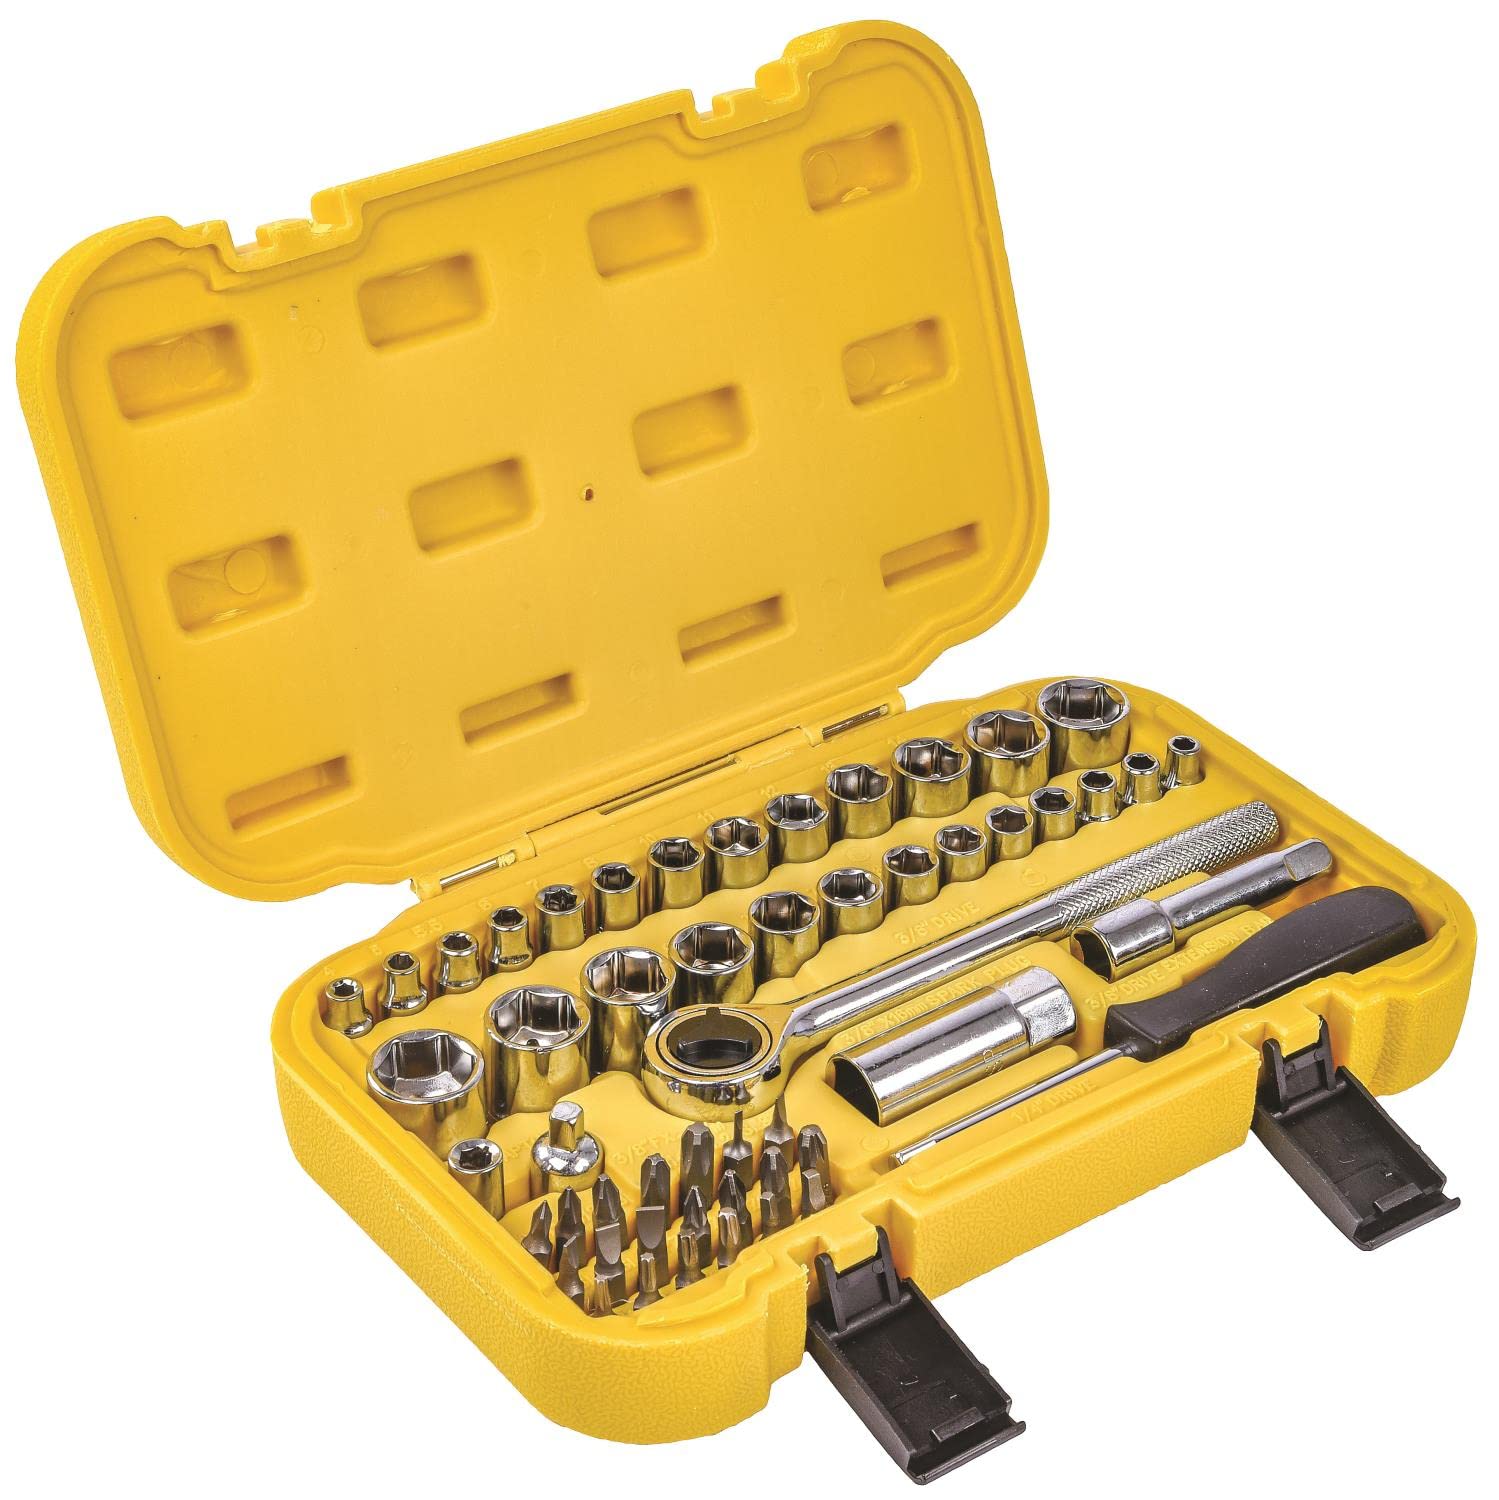 JEgS 52-Piece SAEMetric Socket Set  For 38 and 14 Inch Drive  chrome Vanadium Steel  6-Point Sockets  Yellow Plastic Storage cas